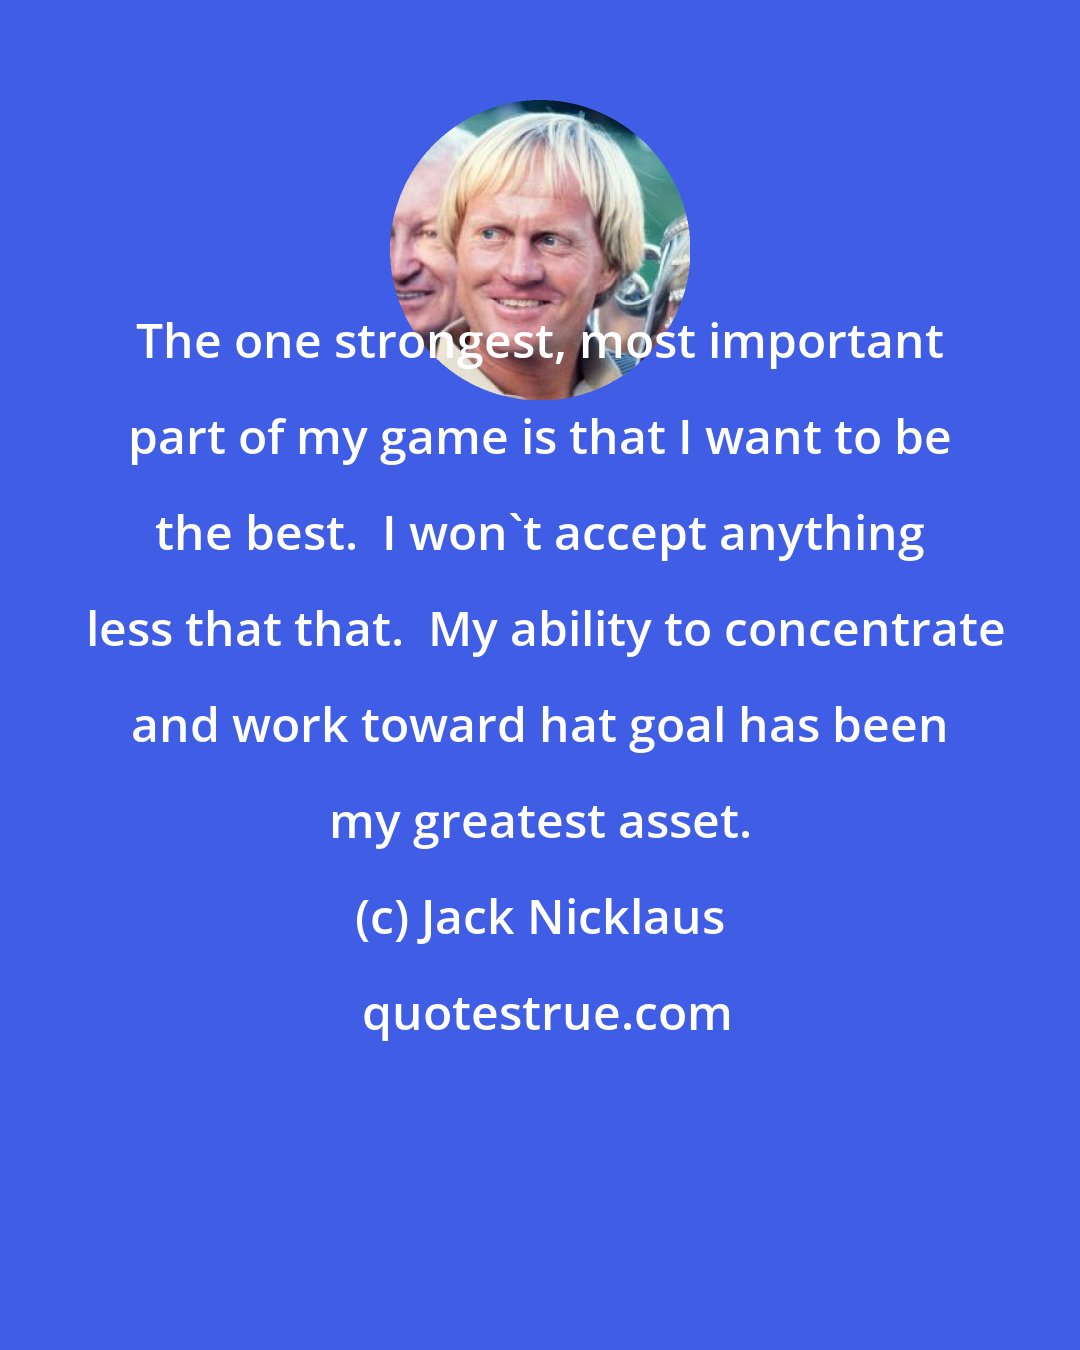 Jack Nicklaus: The one strongest, most important part of my game is that I want to be the best.  I won't accept anything  less that that.  My ability to concentrate and work toward hat goal has been my greatest asset.